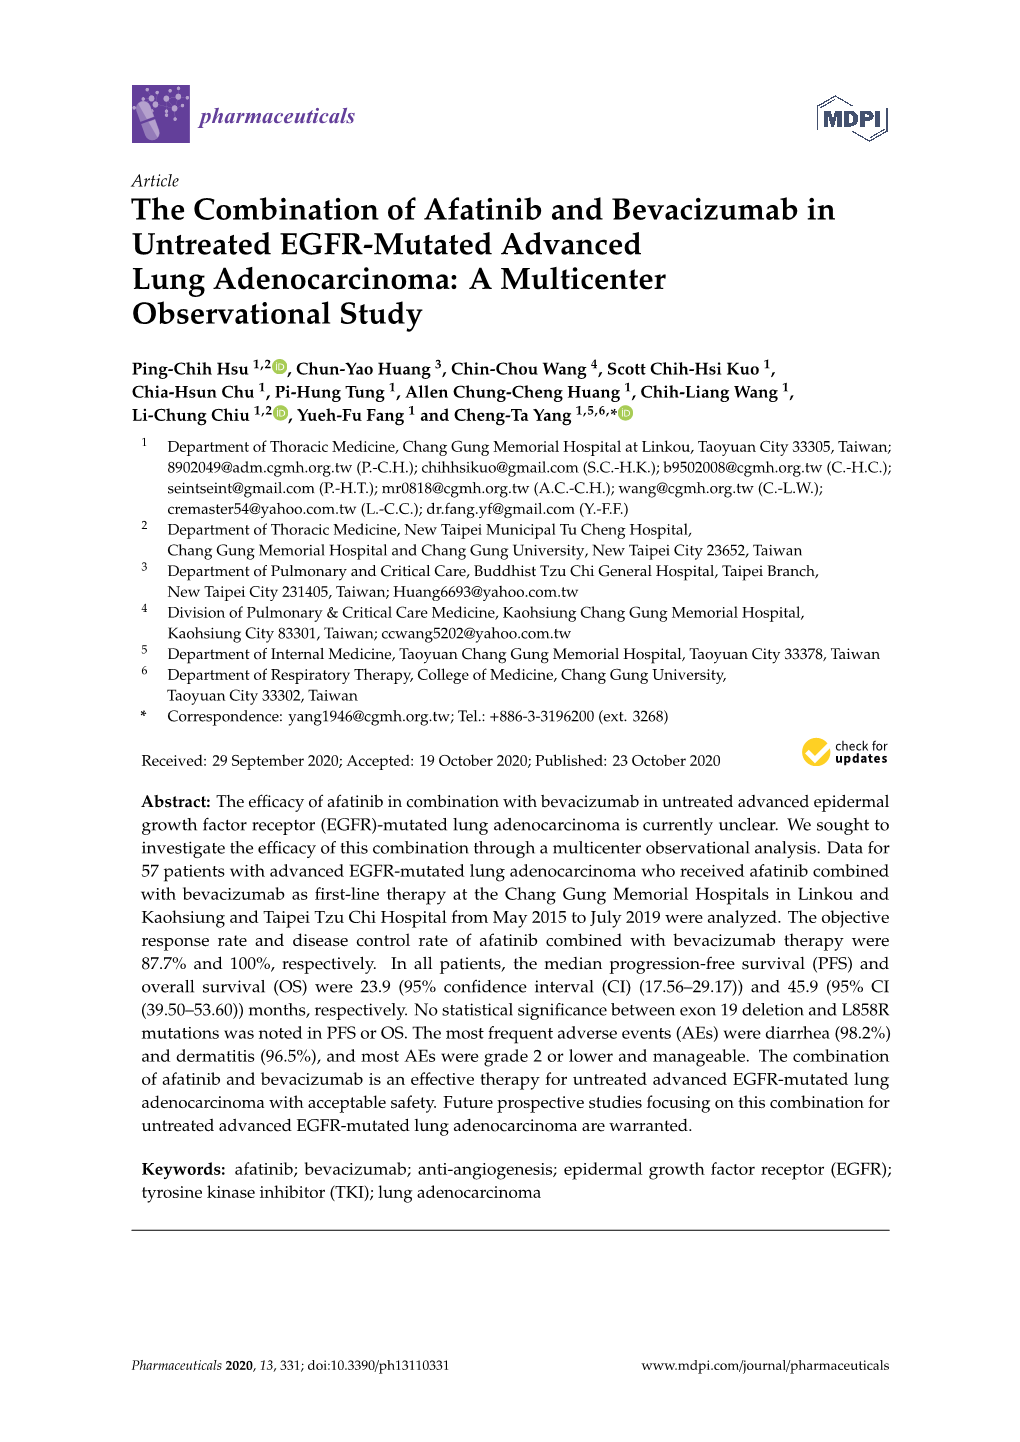 The Combination of Afatinib and Bevacizumab in Untreated EGFR-Mutated Advanced Lung Adenocarcinoma: a Multicenter Observational Study